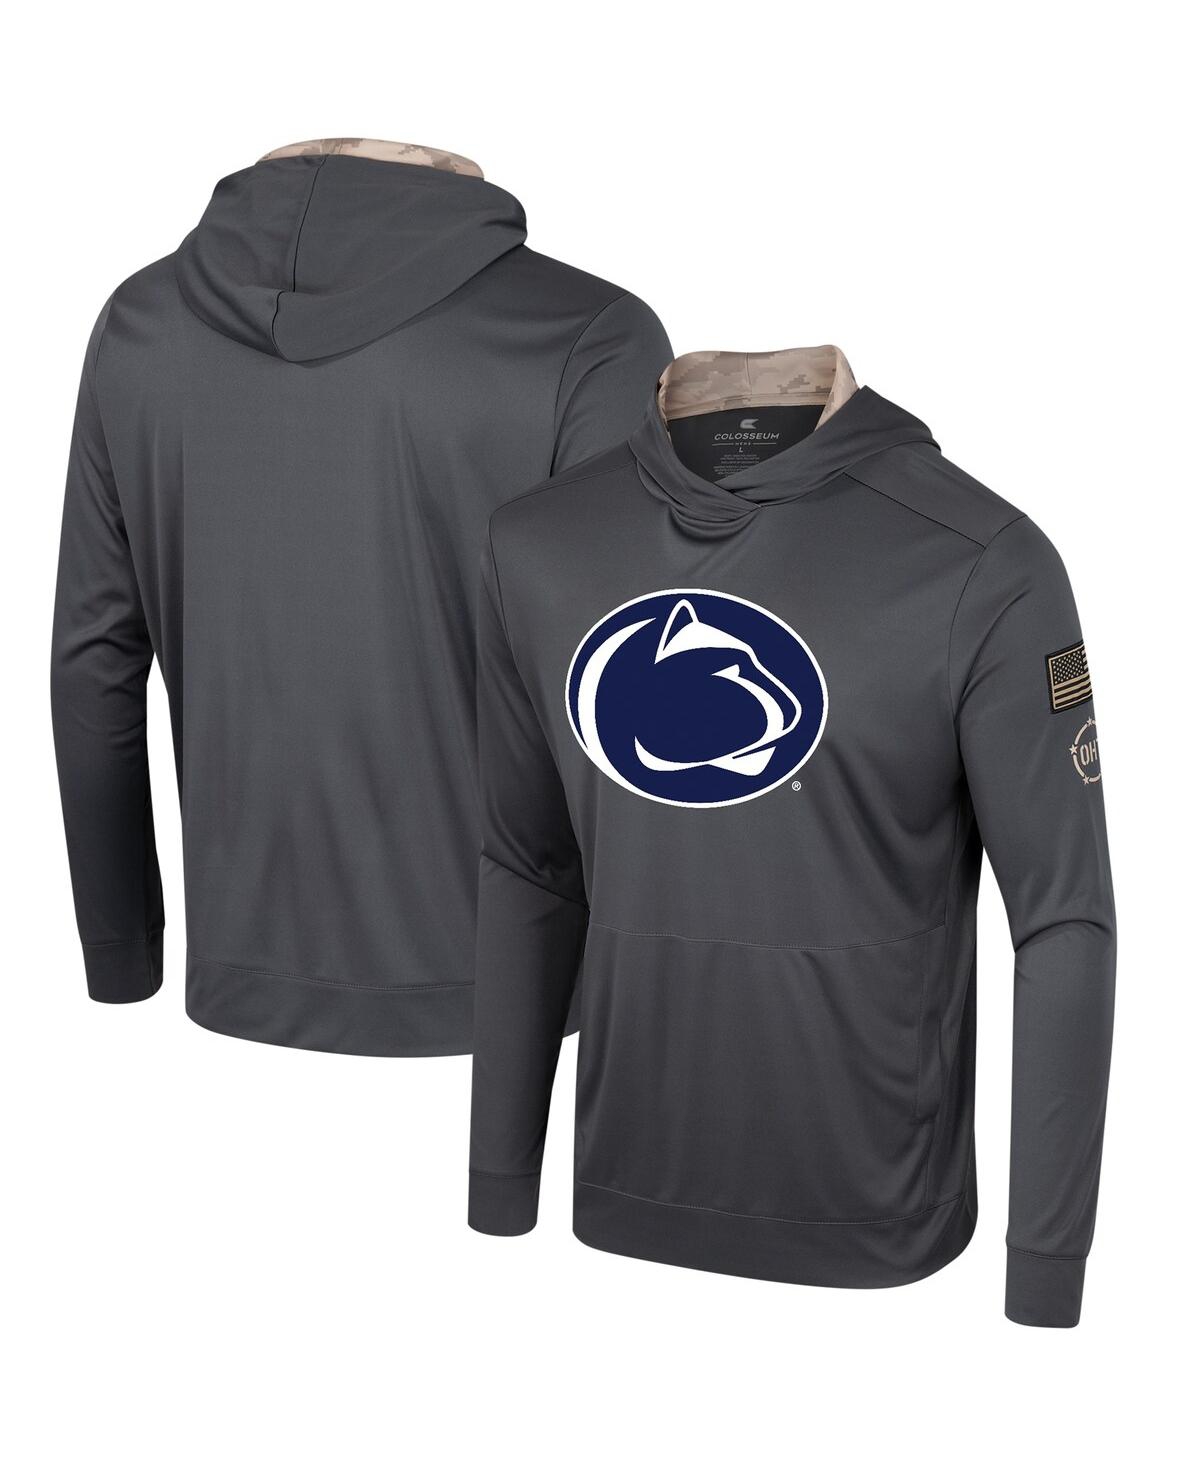 Shop Colosseum Men's  Charcoal Penn State Nittany Lions Oht Military-inspired Appreciation Long Sleeve Hoo